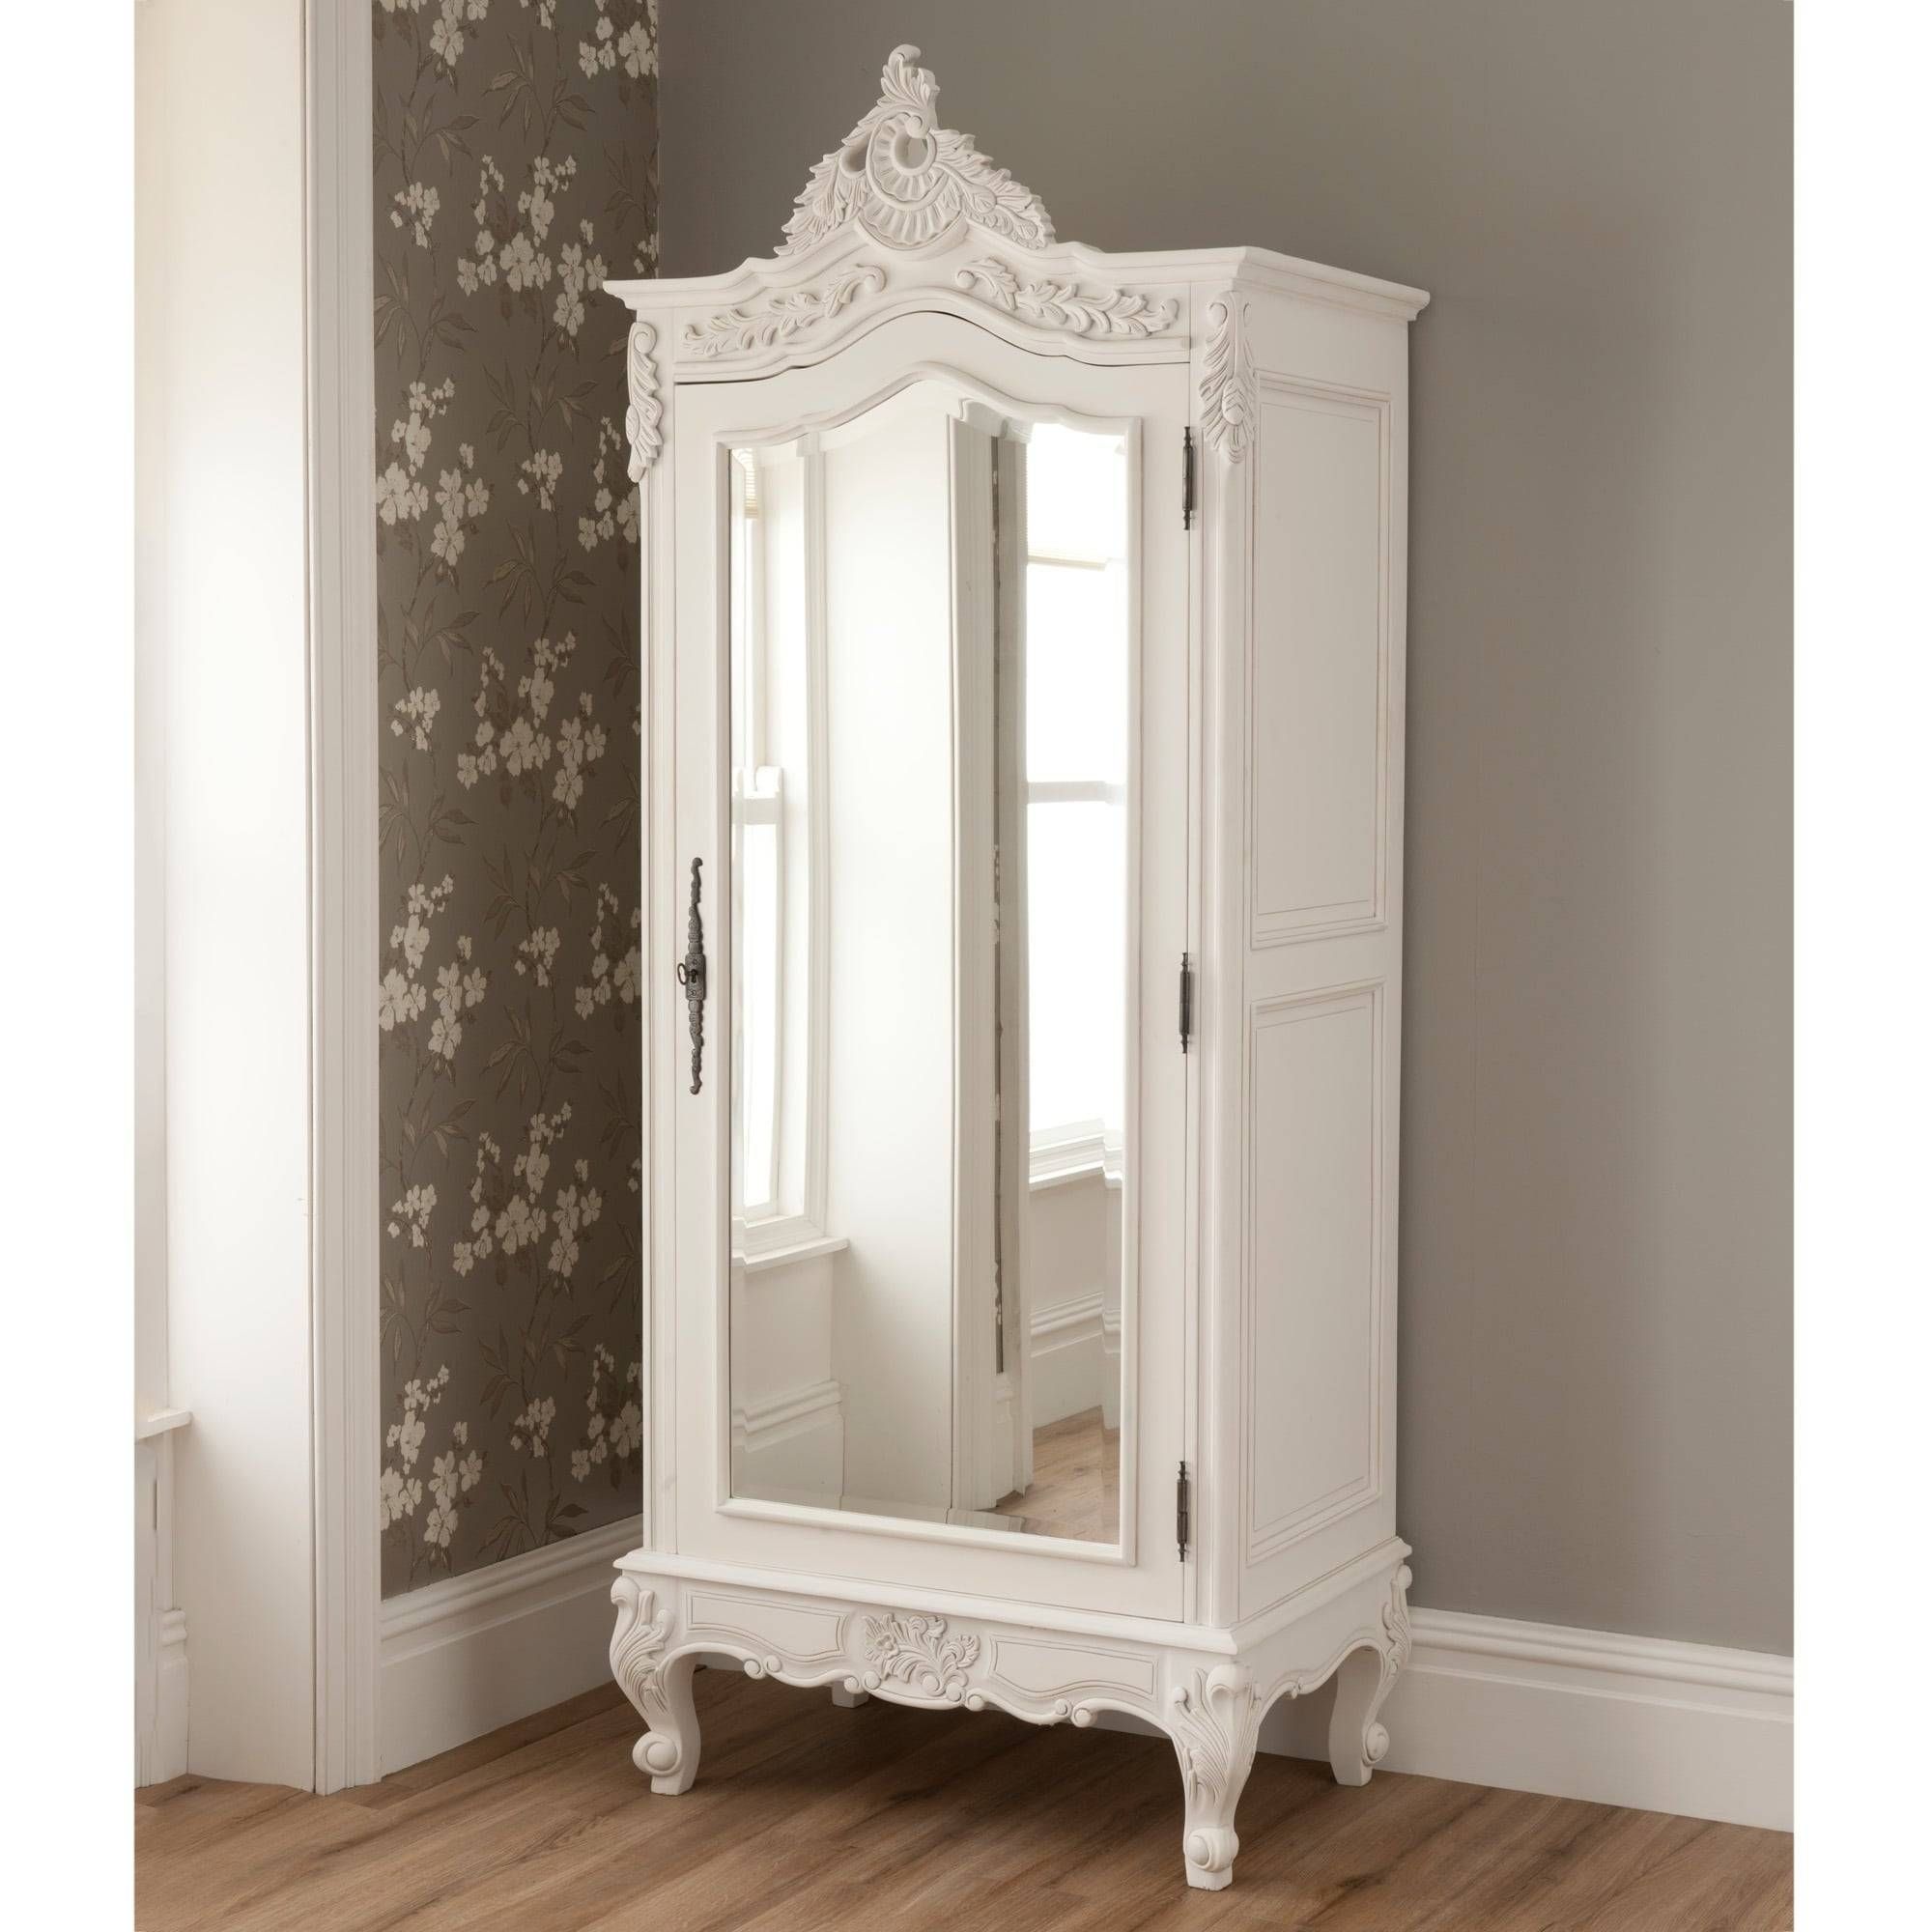 La Rochelle Mirrored Antique French 1 Door Wardrobe For Antique Style Wardrobes (View 3 of 15)